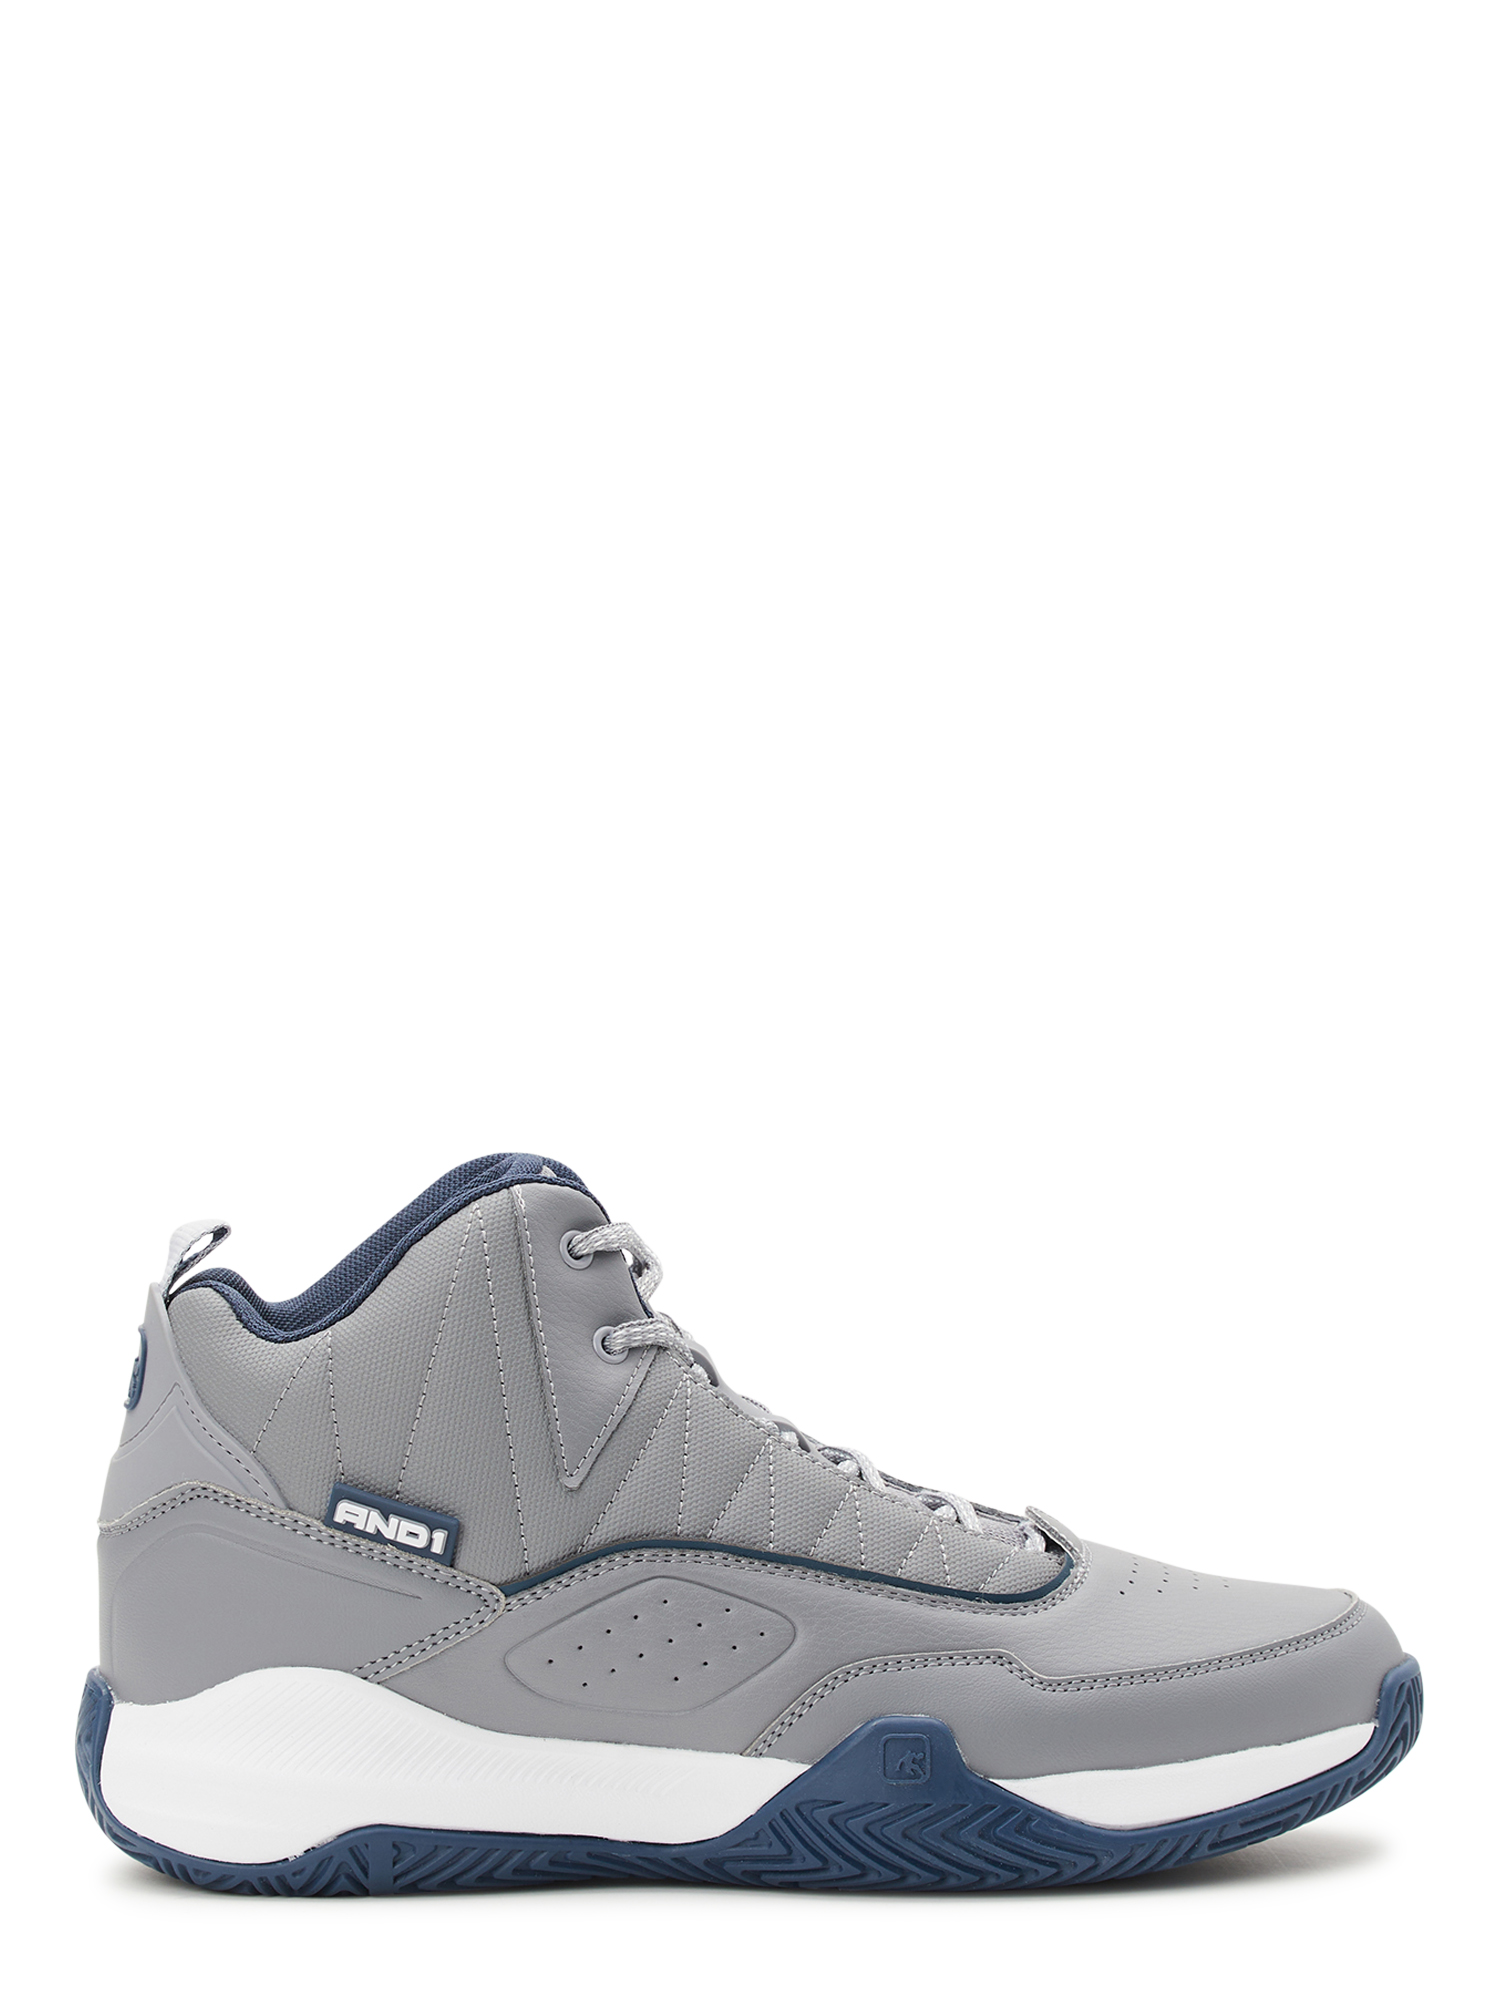 AND1 Men’s Streetball Basketball High-Top Sneakers - image 3 of 7